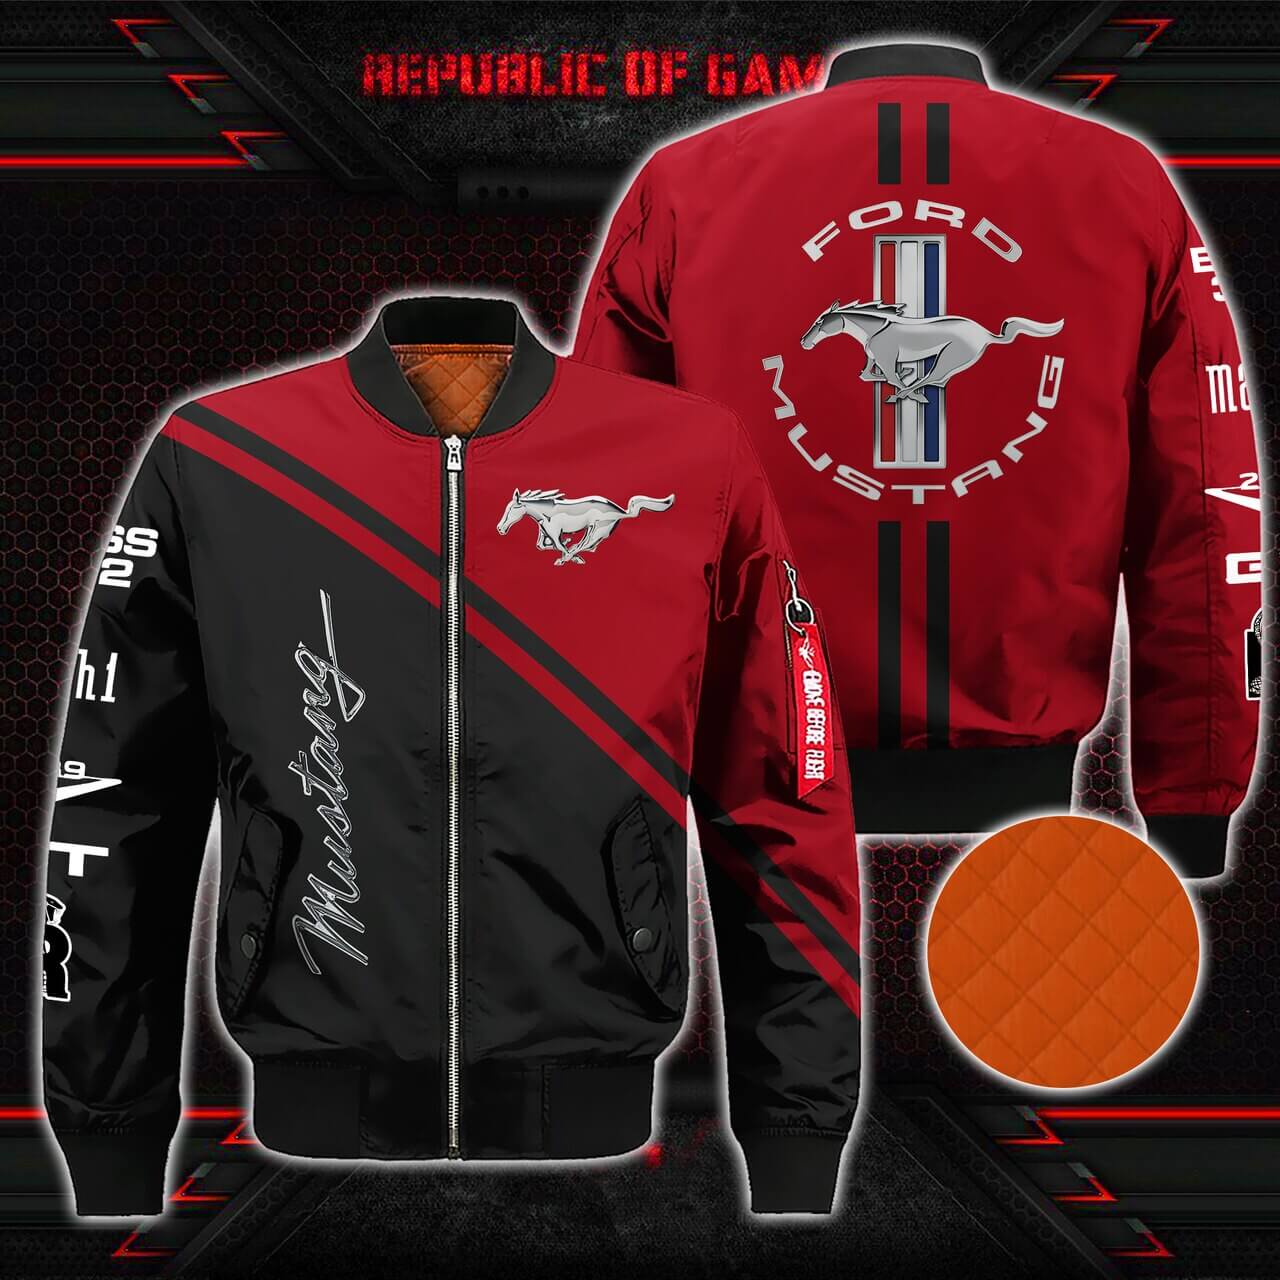 - CLOTHING - FOR BRANDED GIFT BOMBER MUSCLE CARS SPECIAL - OQ19 MUSTANG JACKET BOMBER JACKET JACKET BOMBER - UNIQUE MUSTANG MYFORDUS - BOMBER SPORTS FORD AMERICAN - LOVER JACKET -